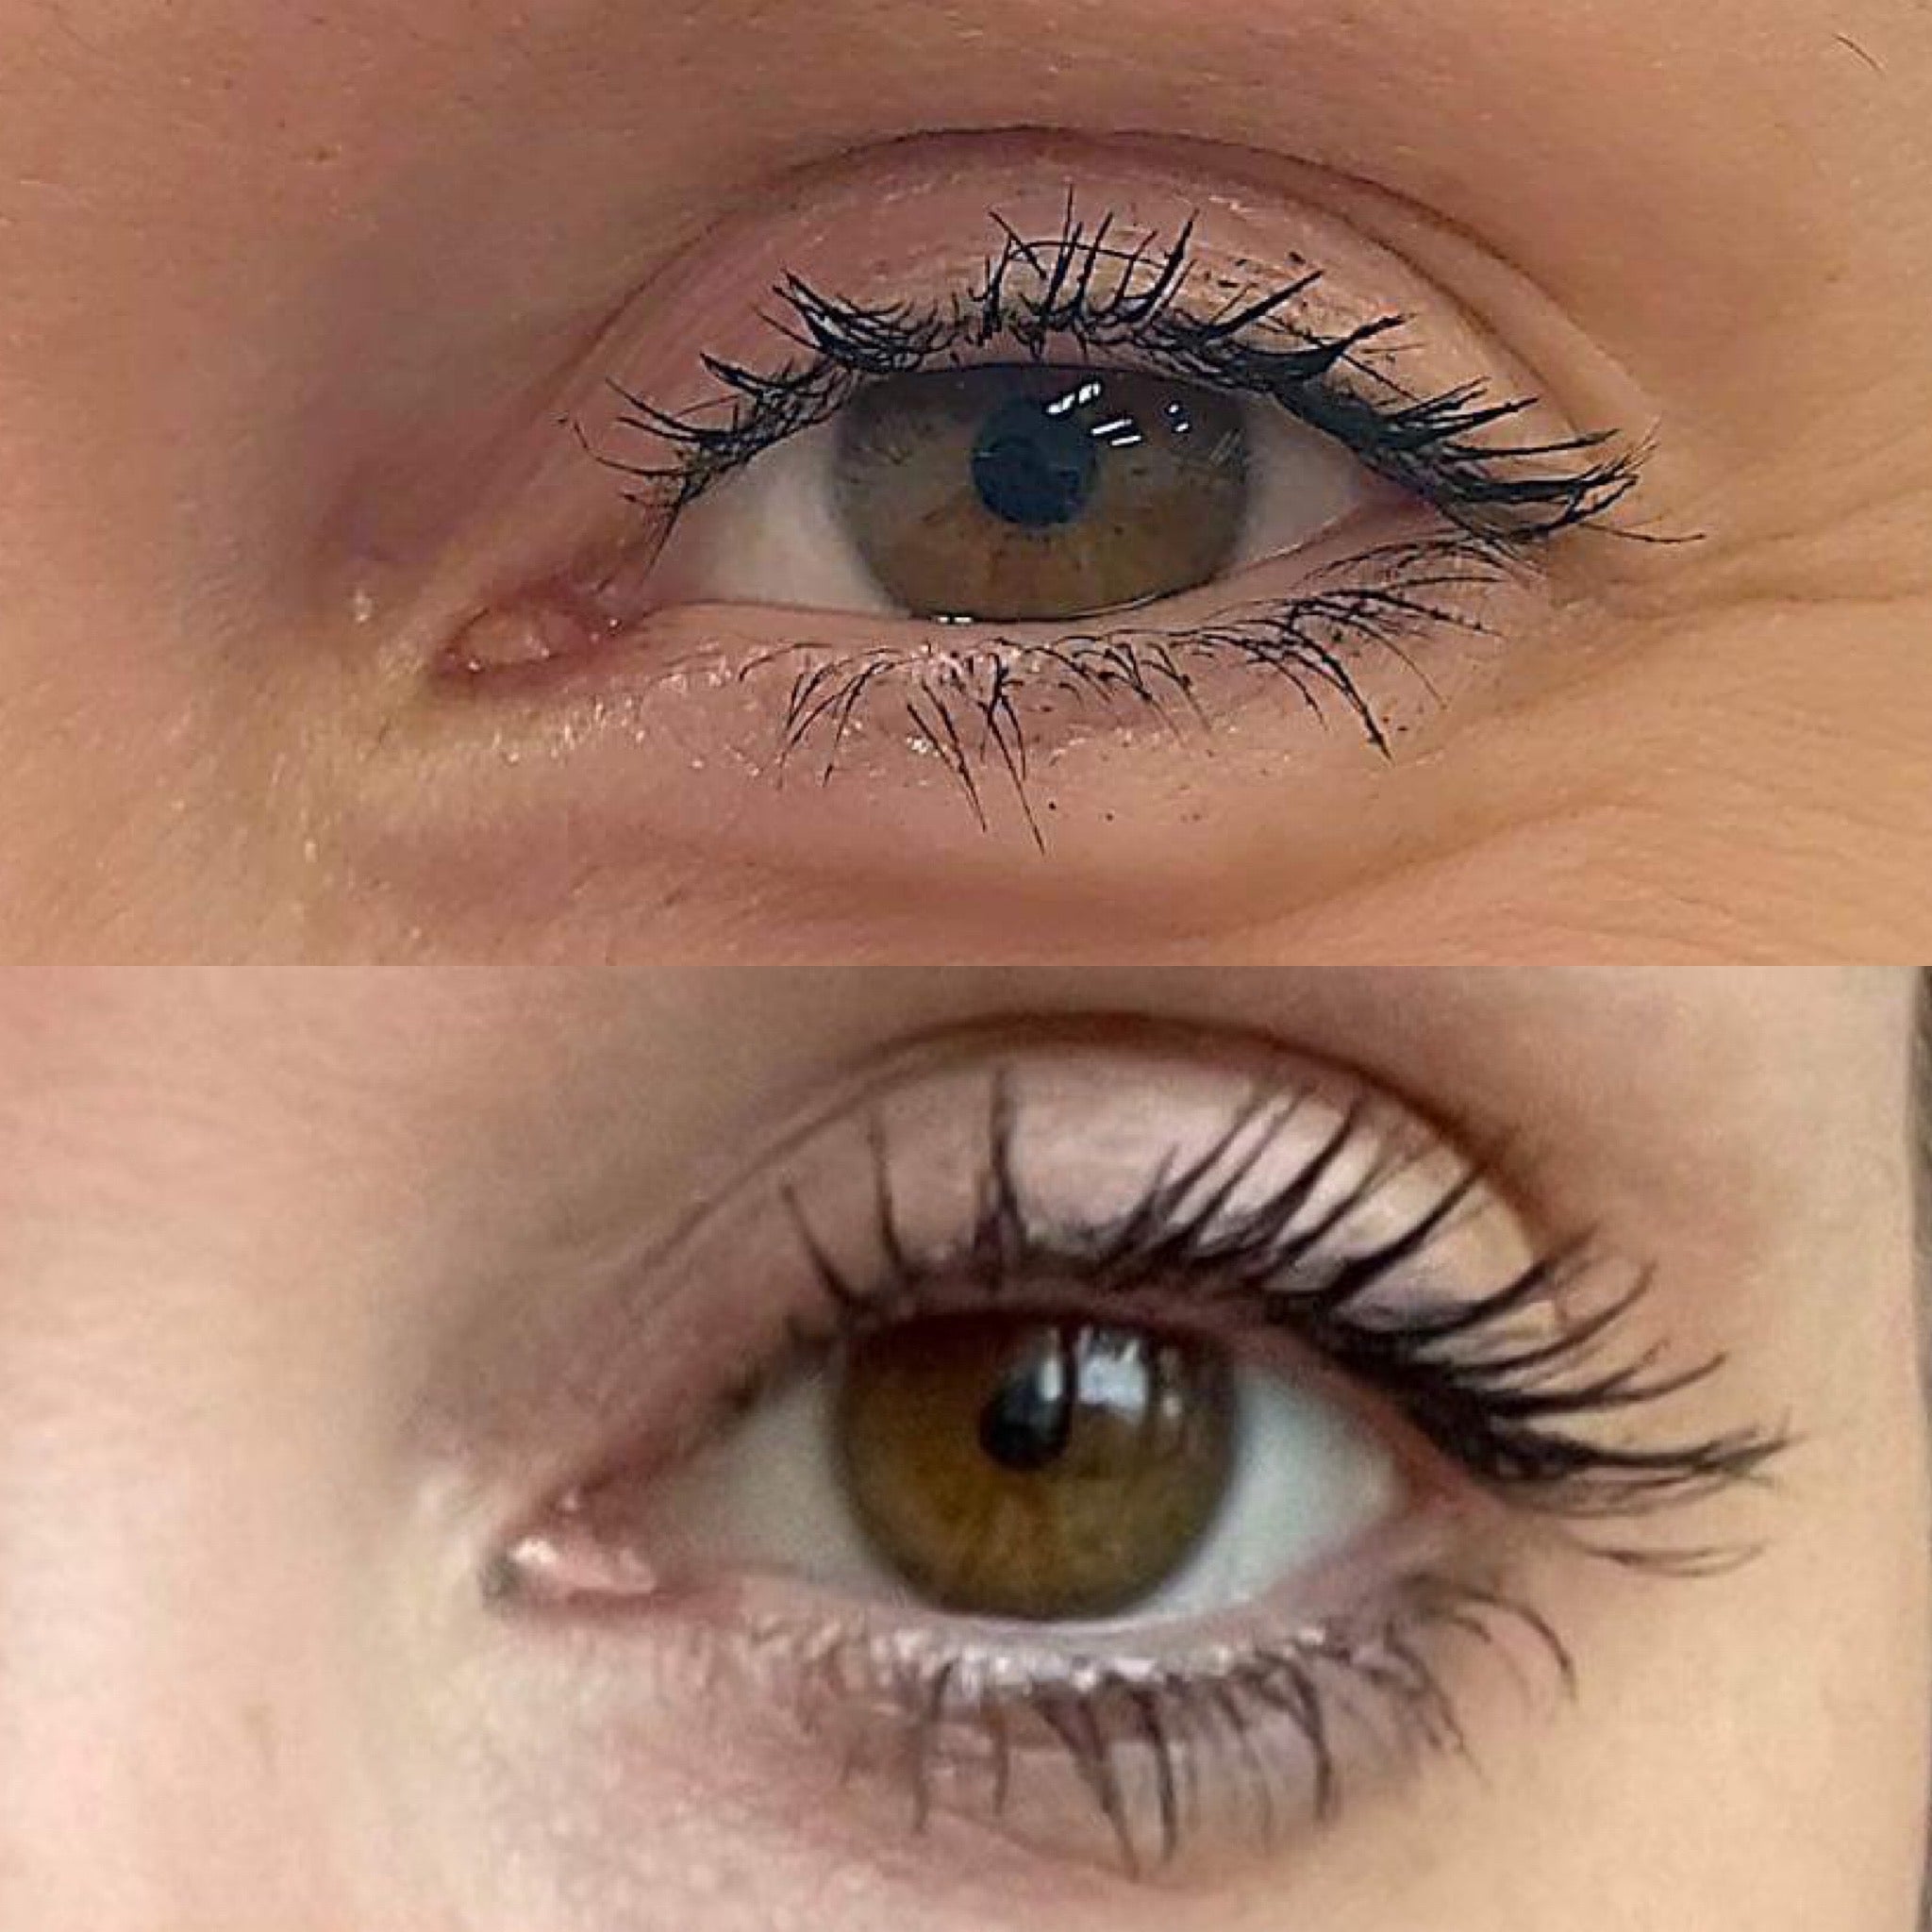 Before and After of using lash growth serum